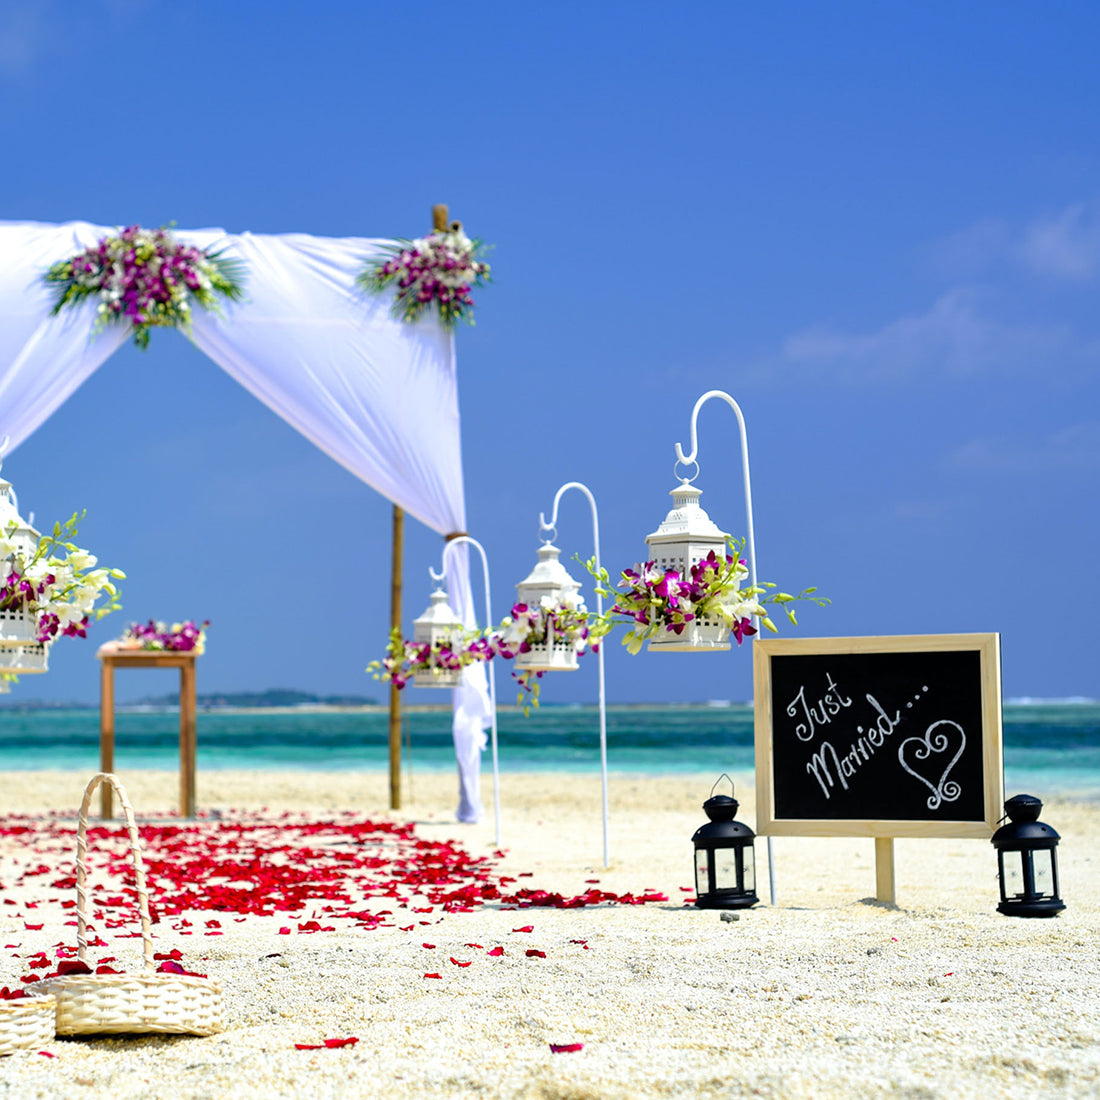 Inspiration for Your Destination Wedding: Tying the Knot Somewhere Hot